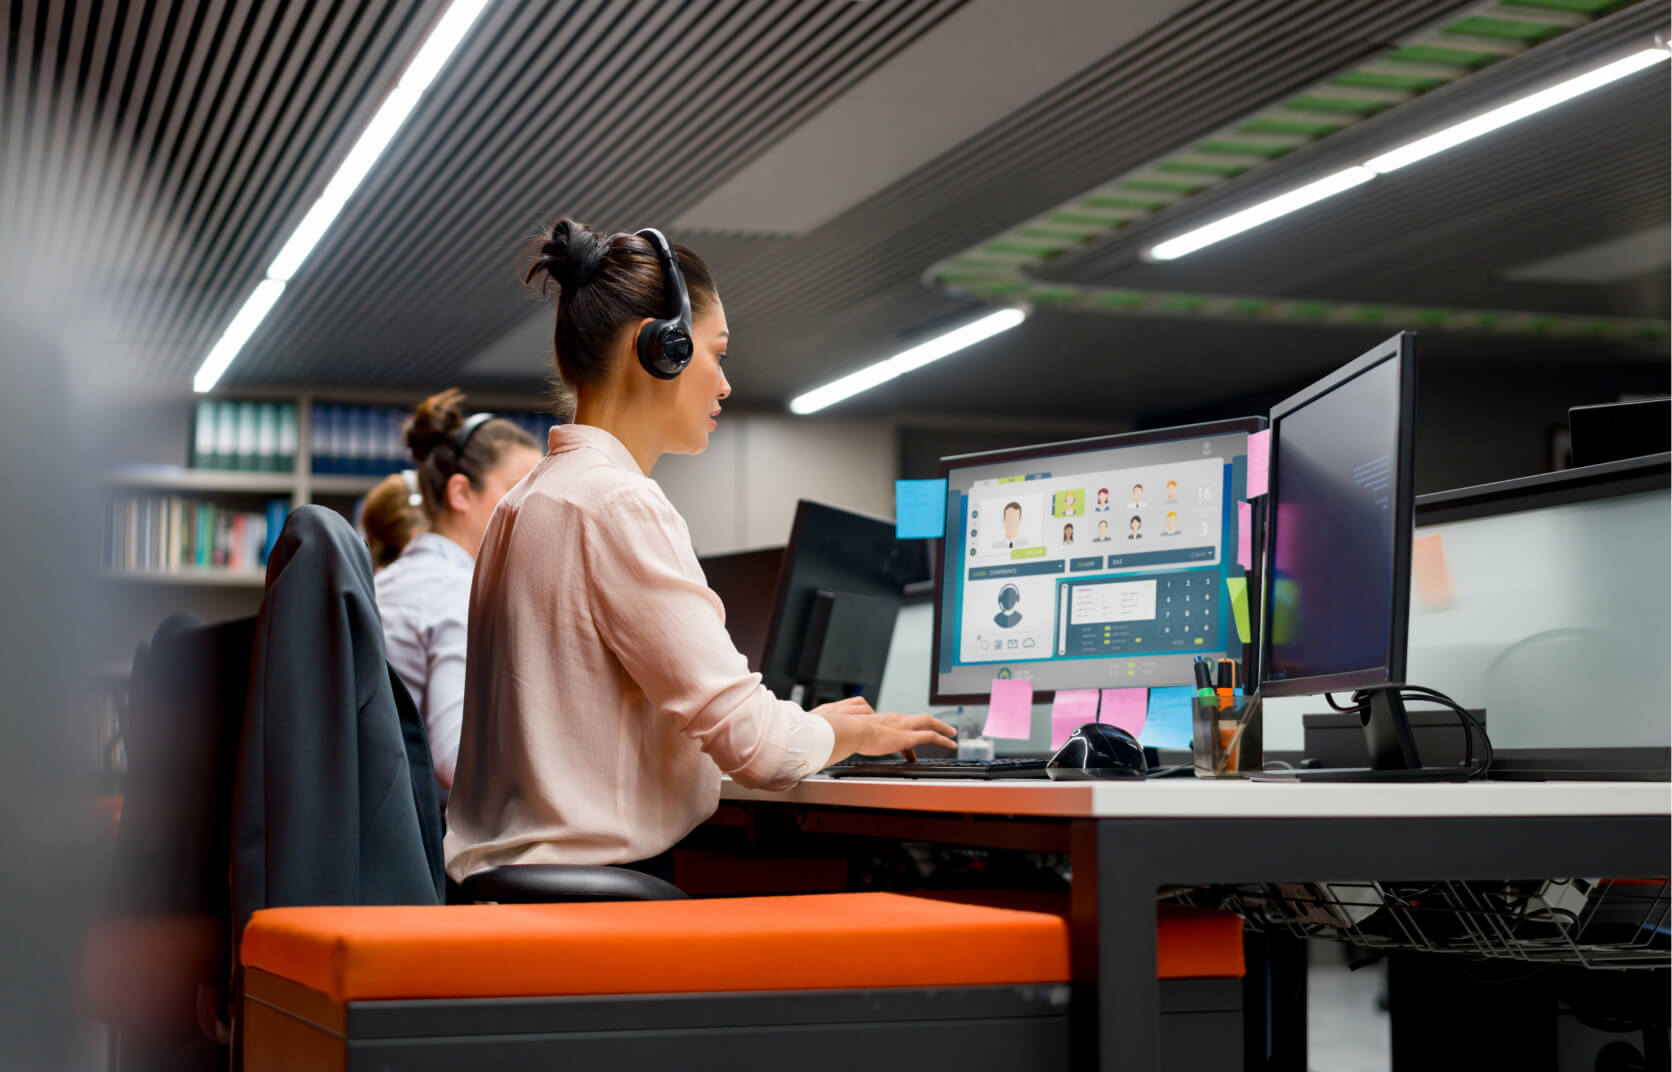 A young woman wearing headphones while working at a computer to provide managed cloud services